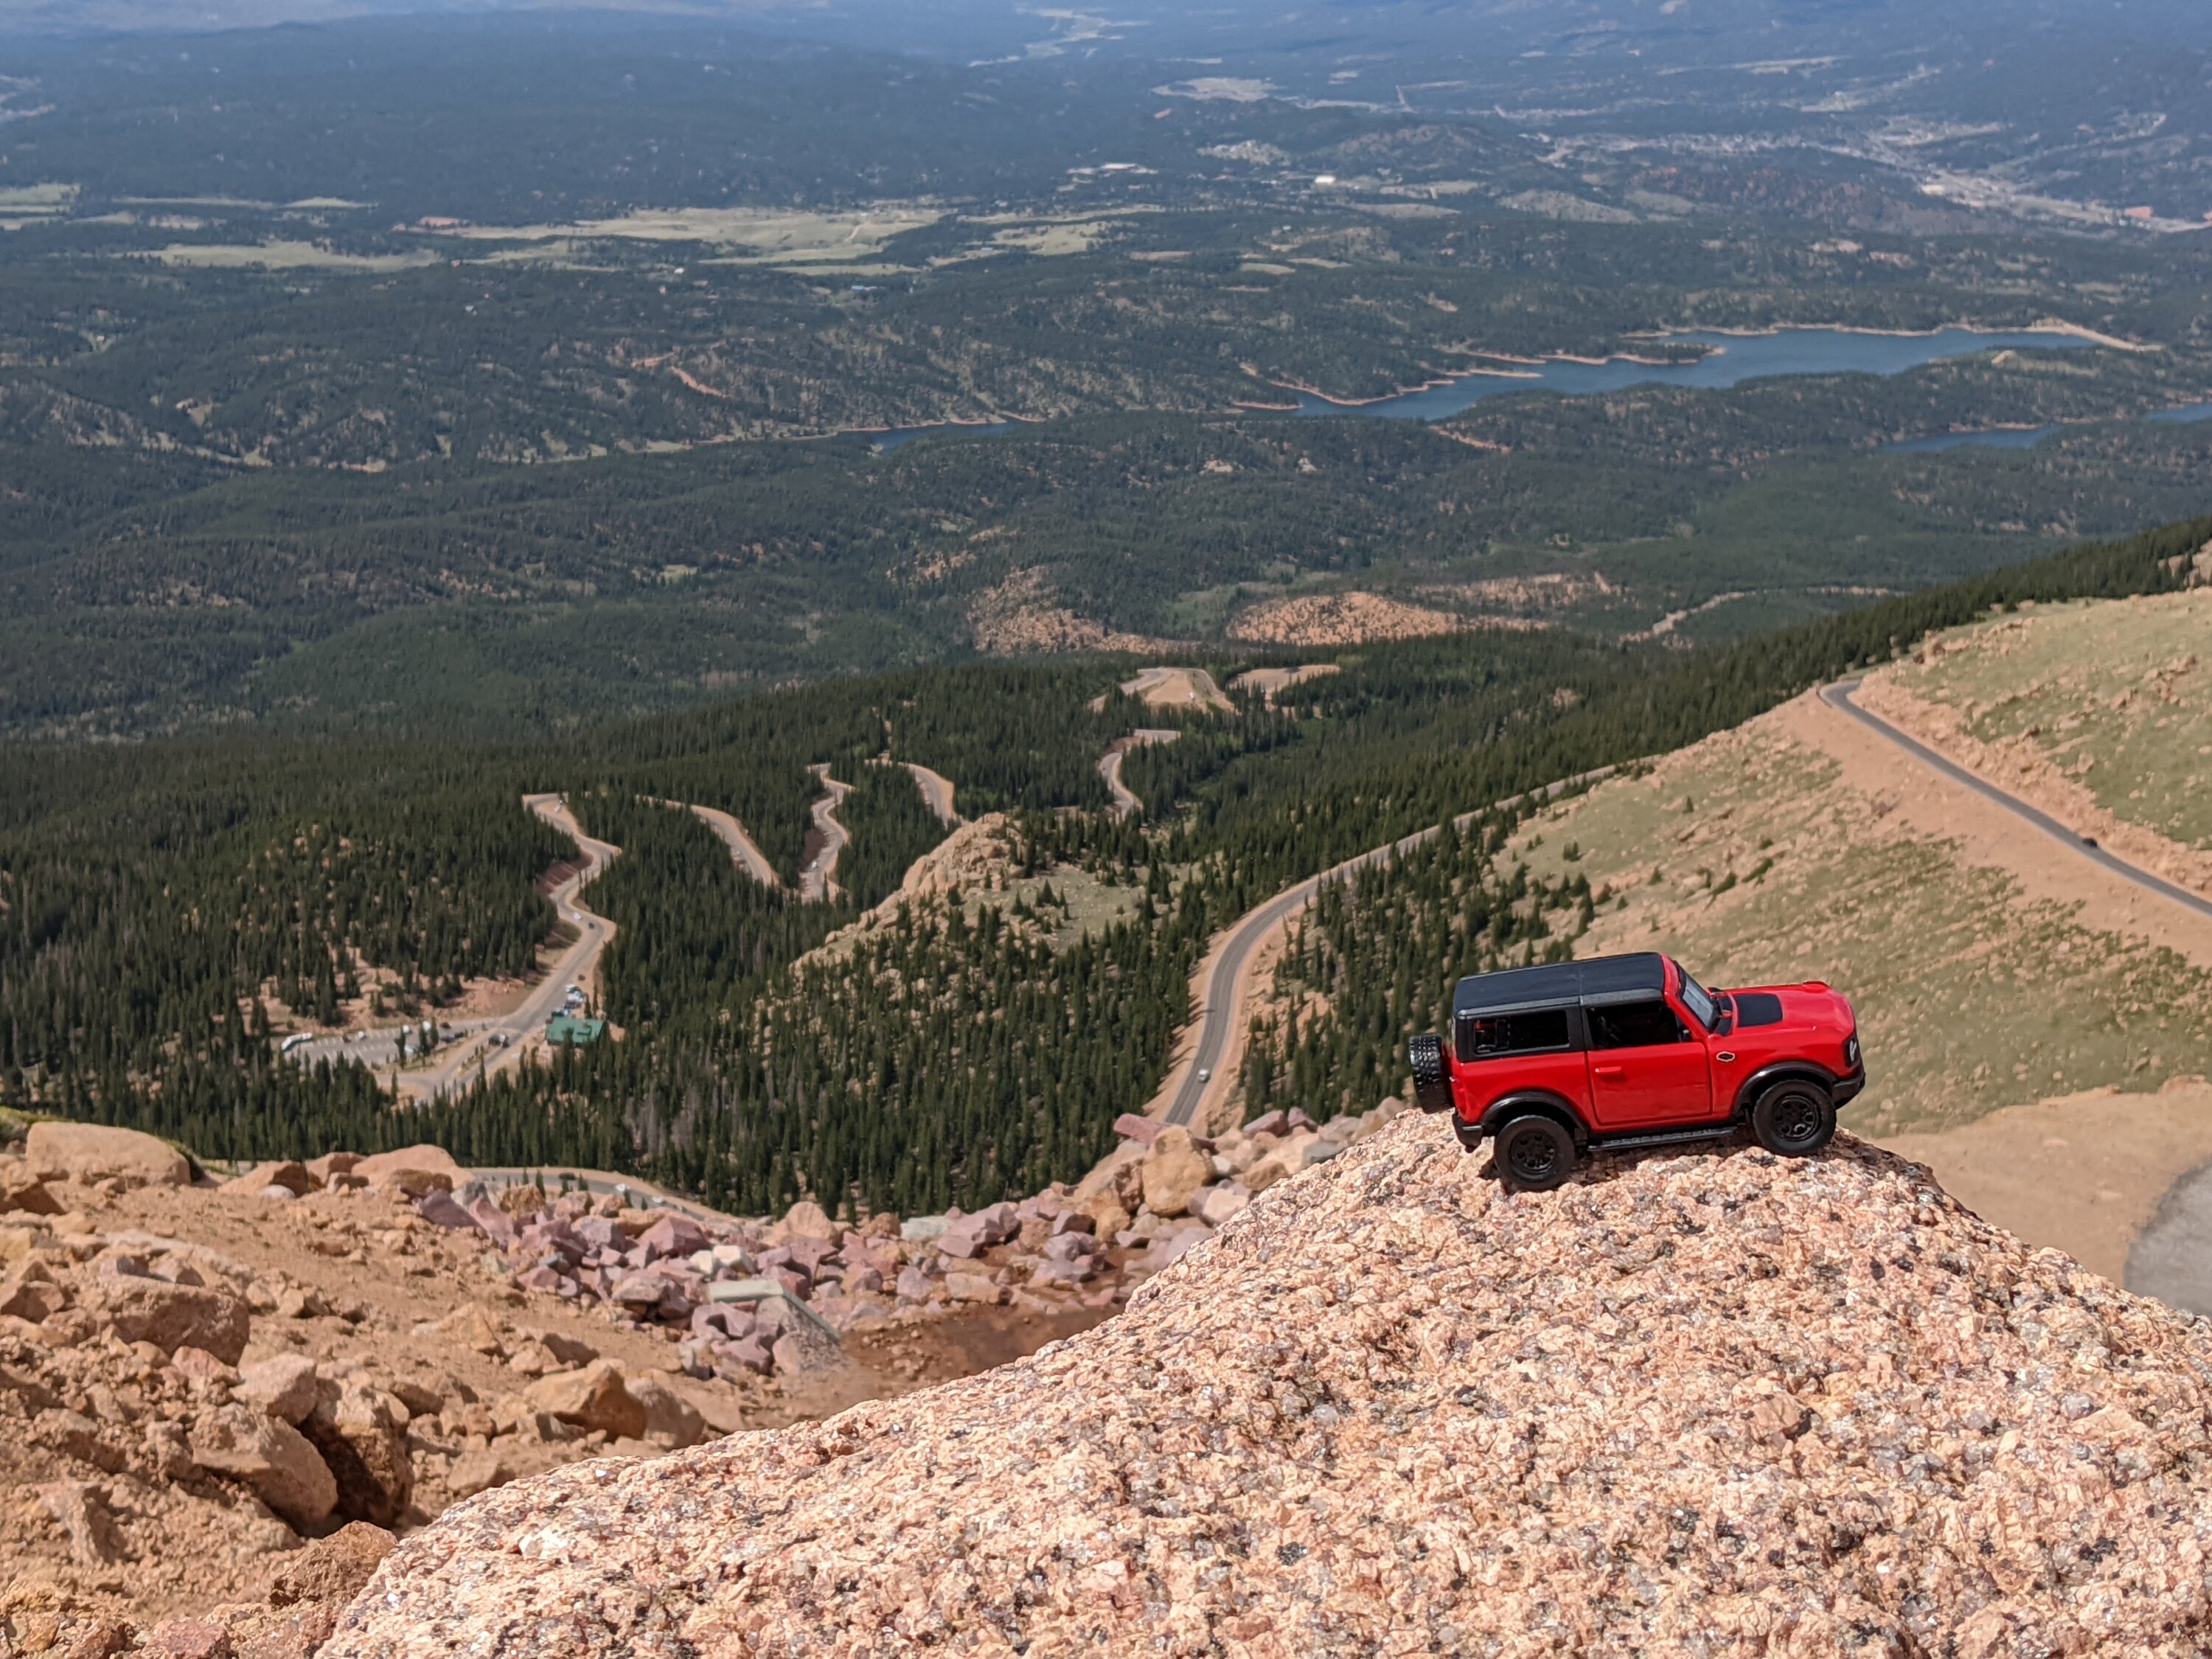 Ford Bronco Bronco pic at 12,000 ft. PXL_20220620_214852987